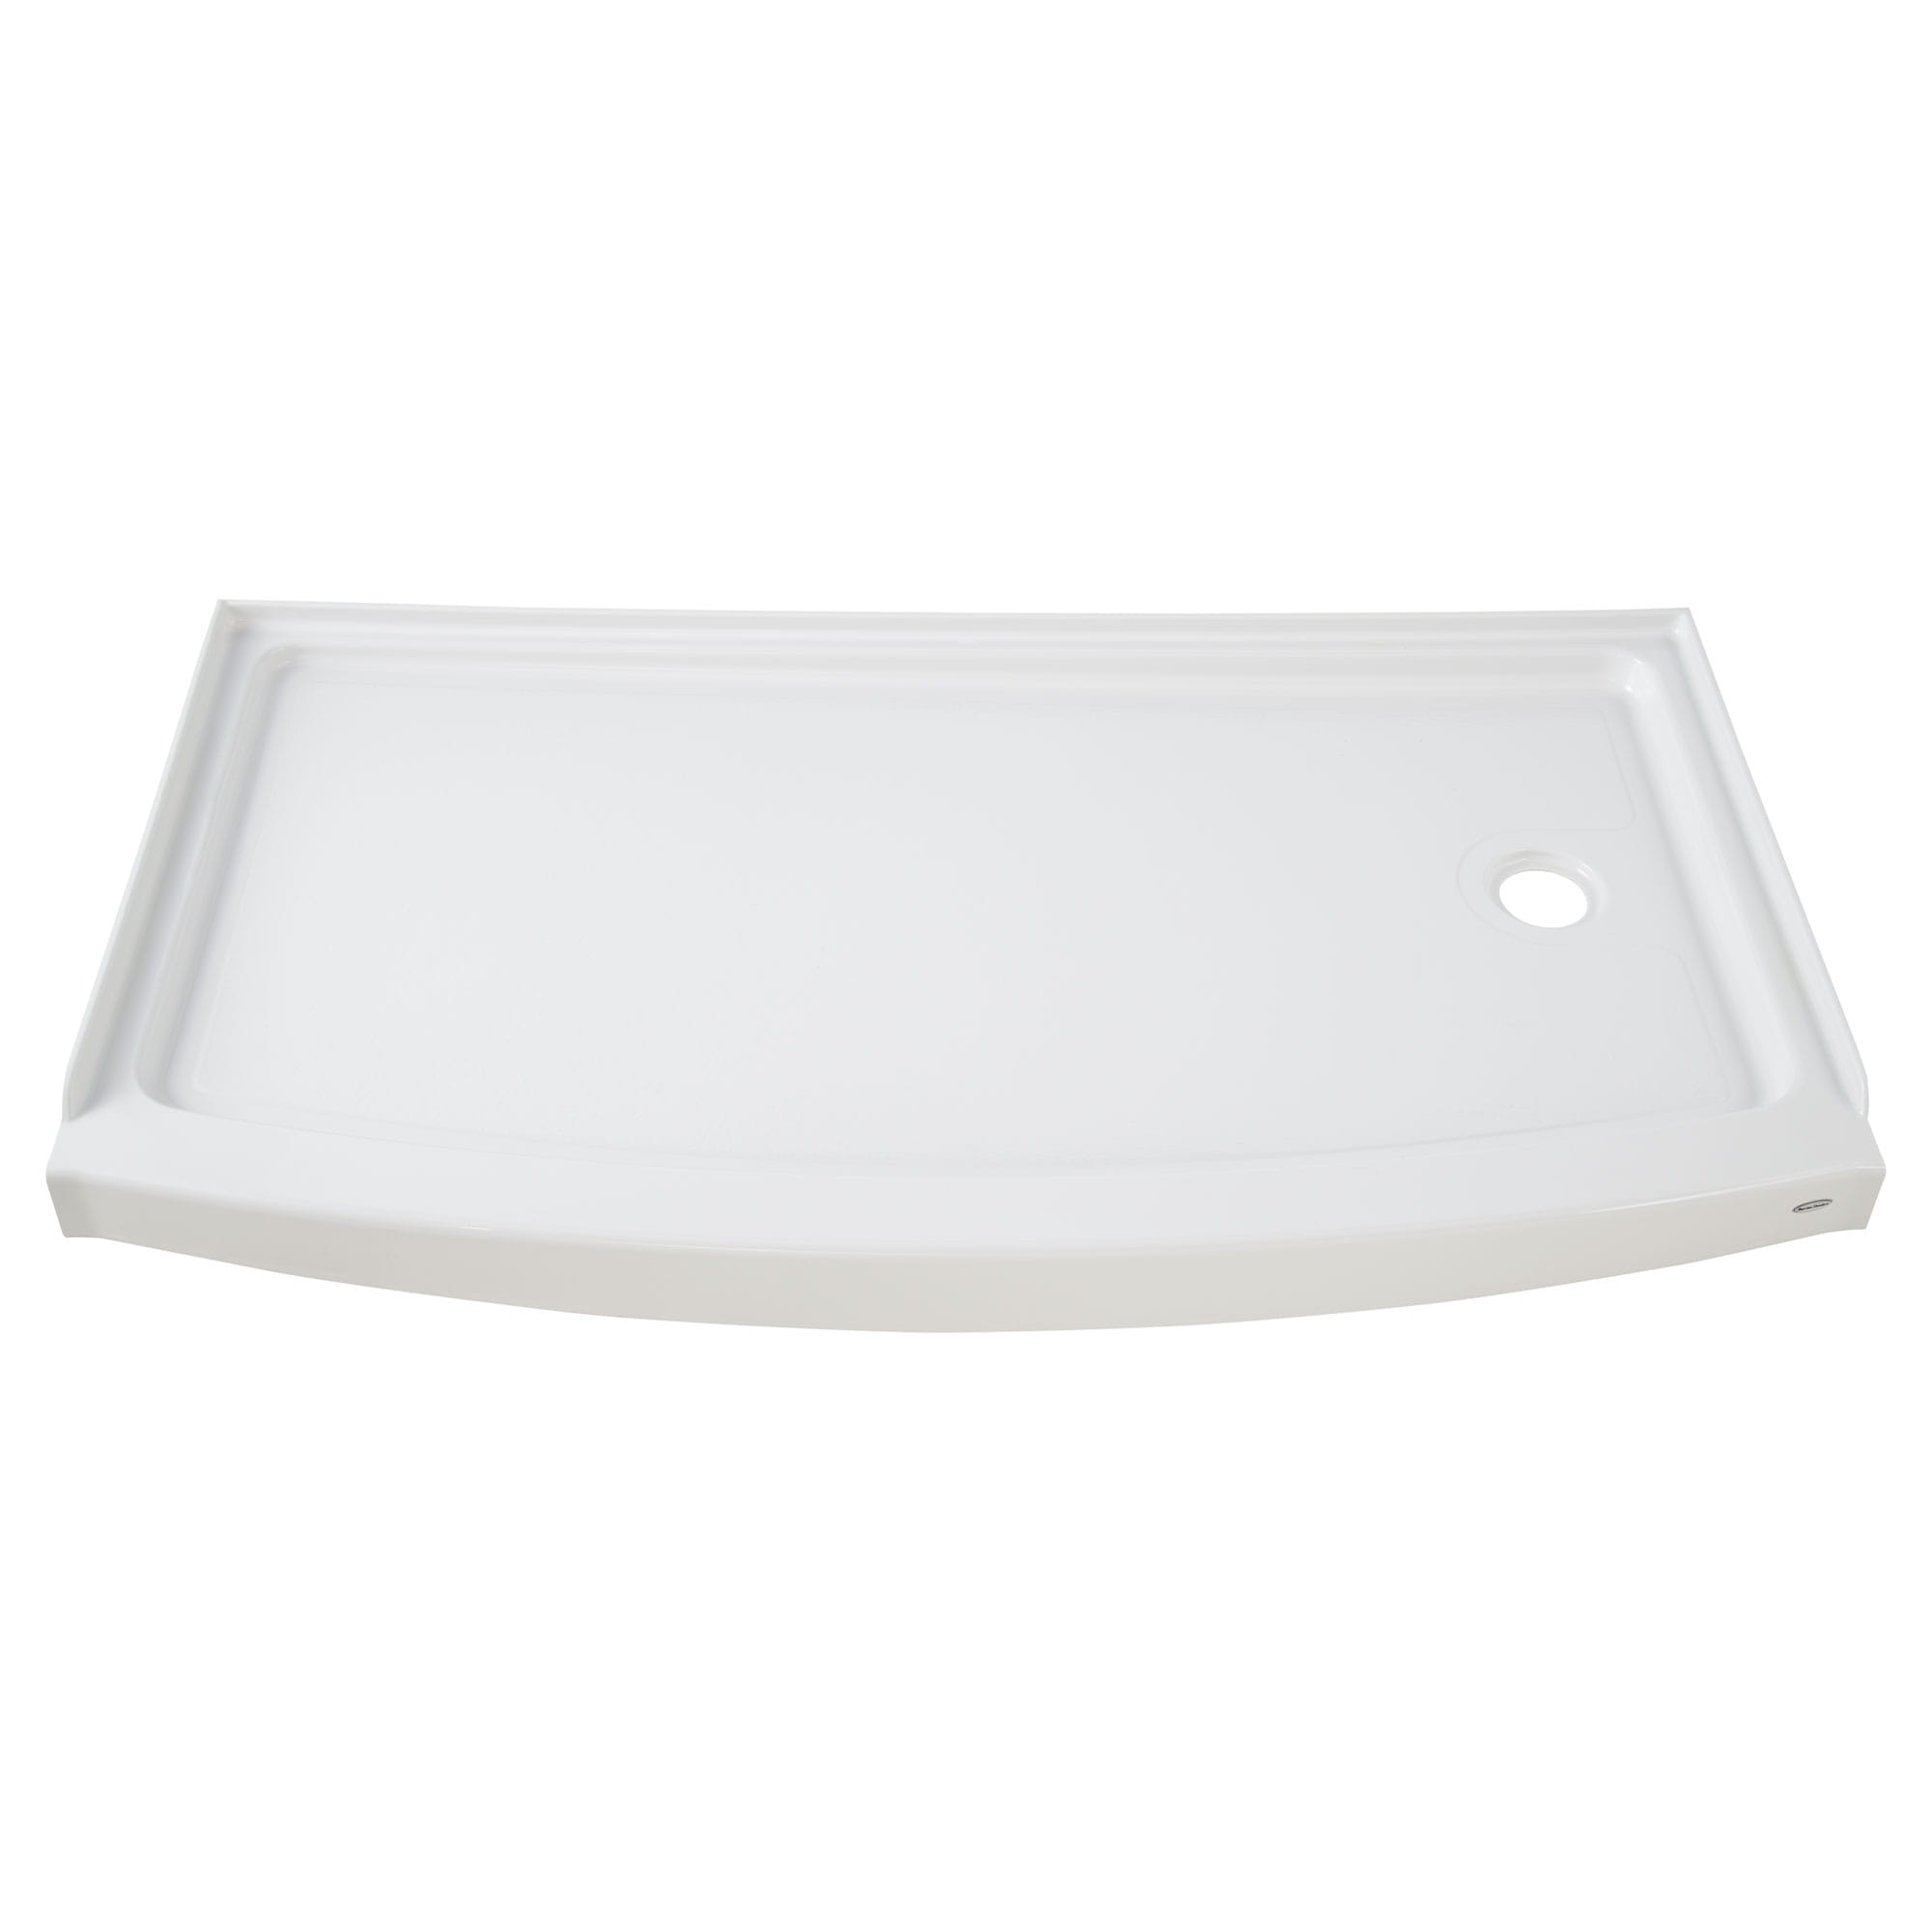 Ovation 60x30-inch Low Threshold Shower Base- Right Hand Drain